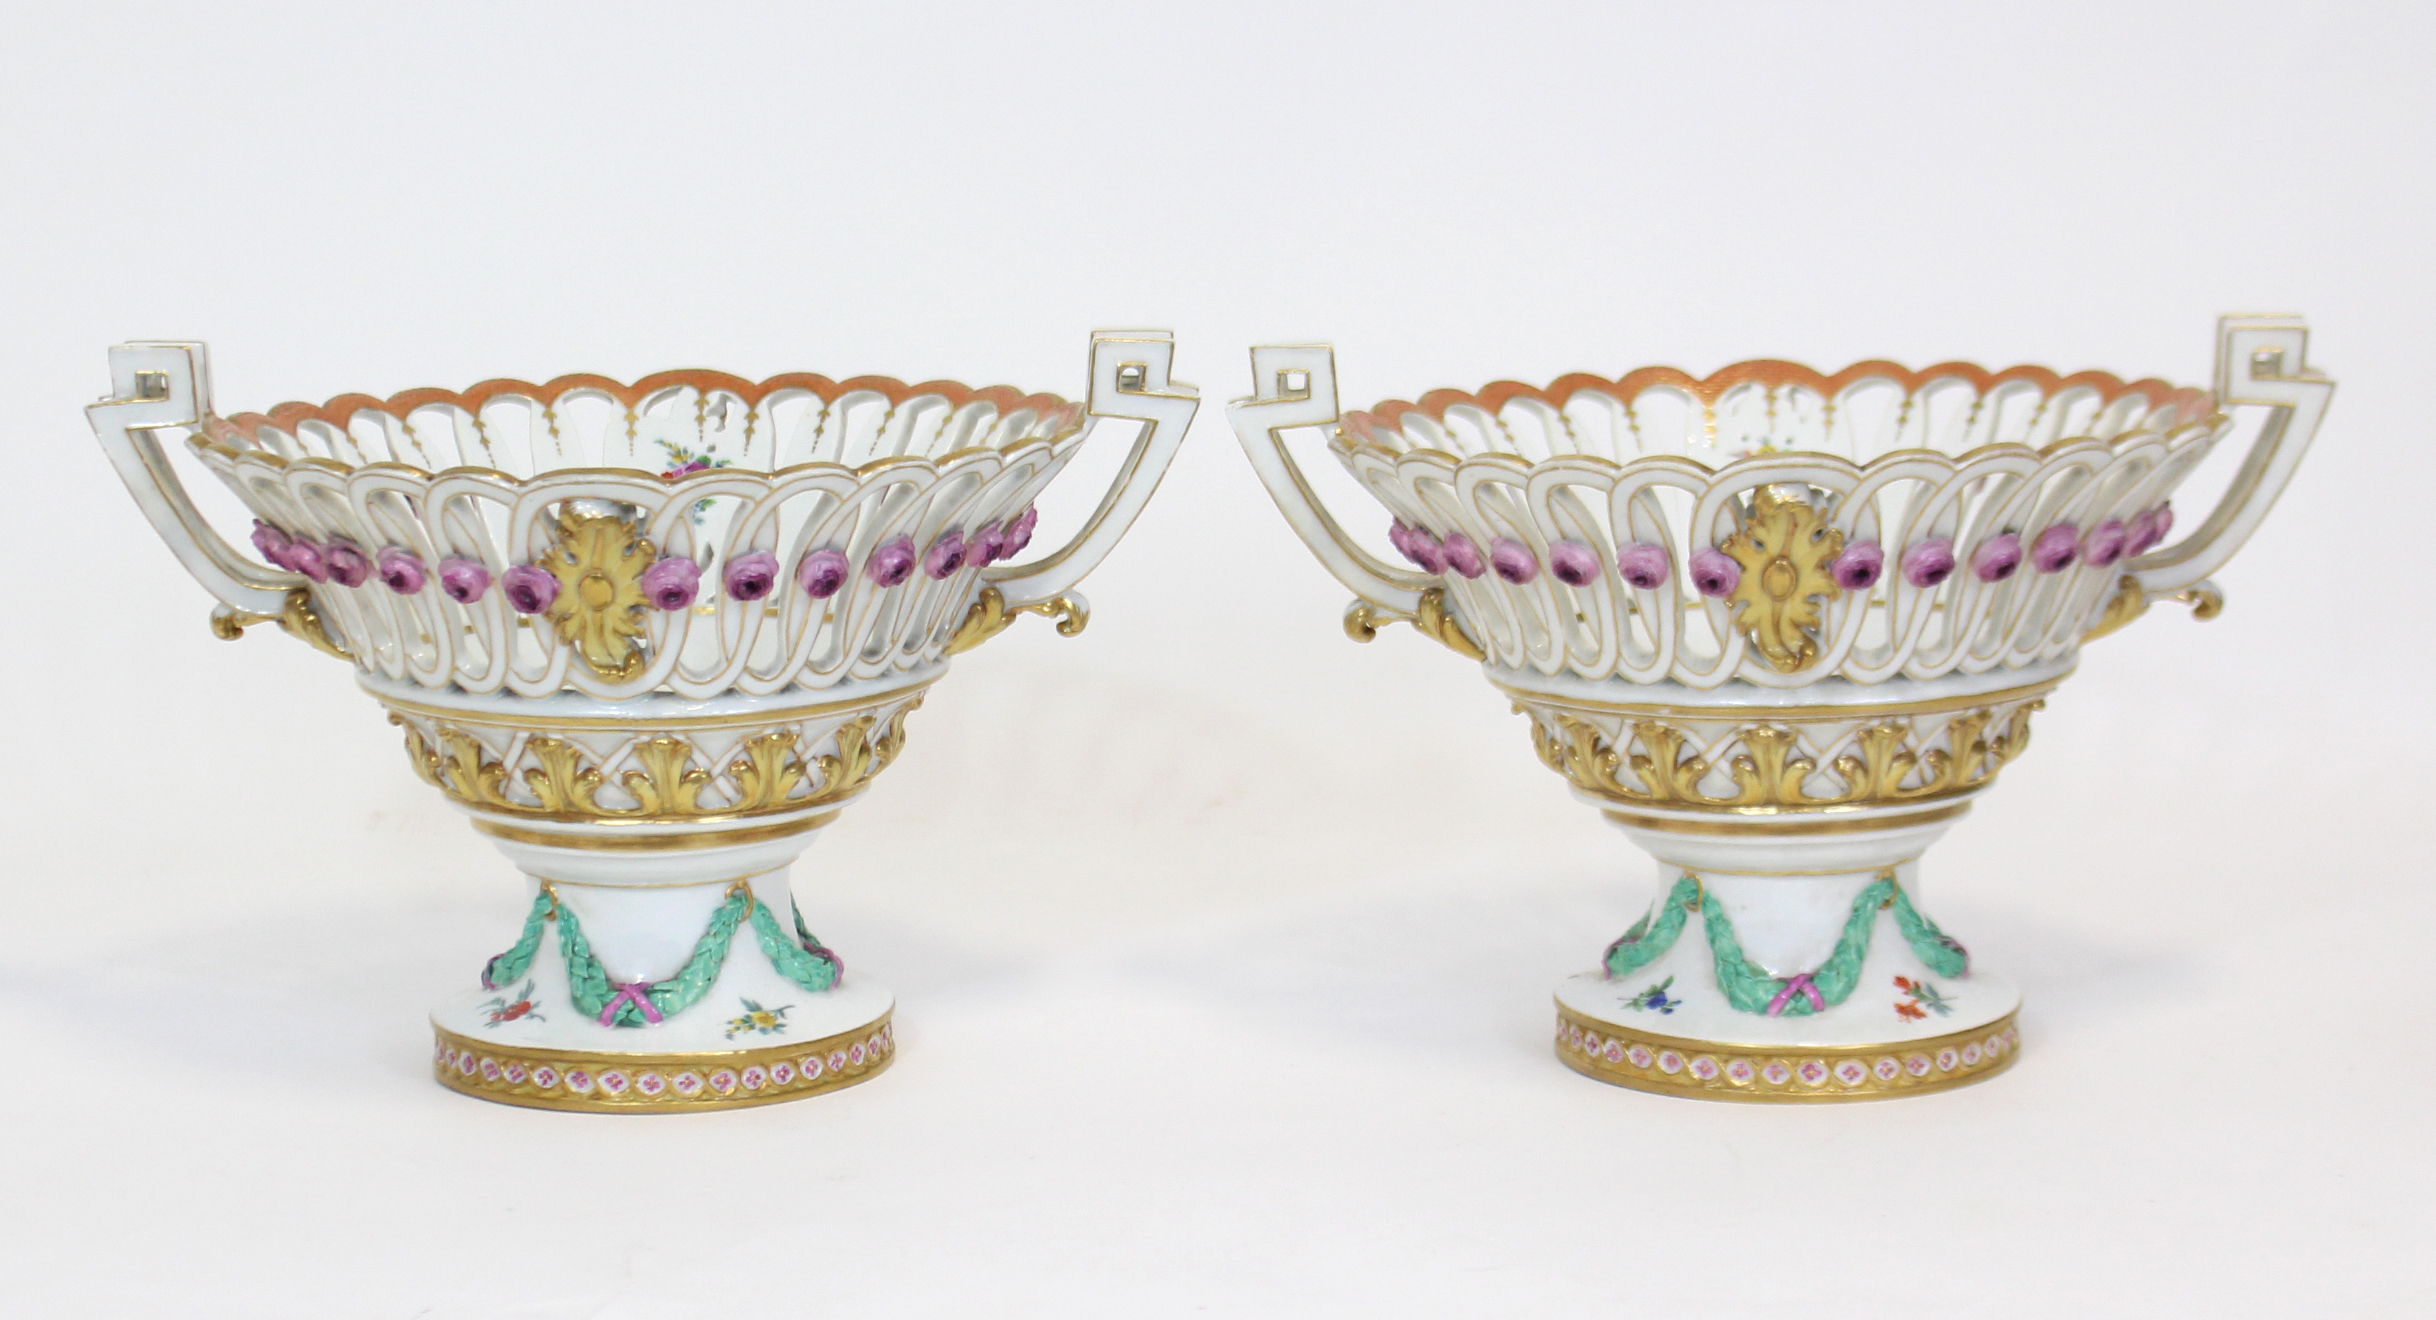 A MEISSEN MARCOLINI PERIOD PART DESSERT SERVICE, comprising: a pair of comports with applied - Image 5 of 13